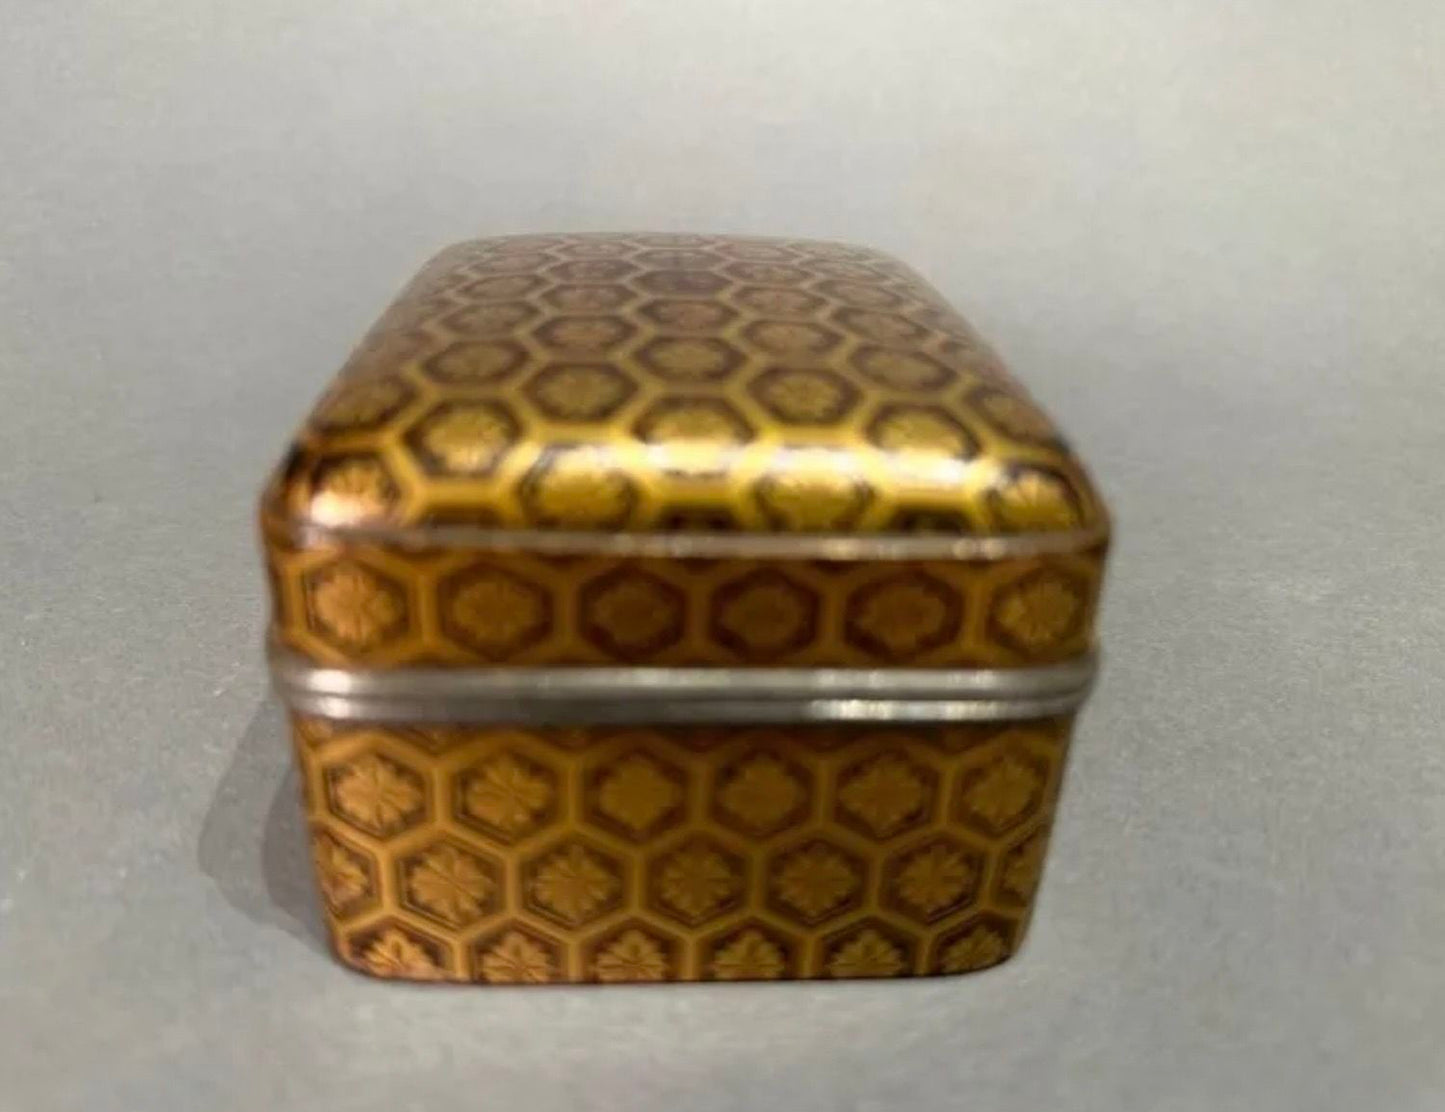 A Japanese Edo Period Lacquer Kogo (Incense) Box, late 17/early 18th Century